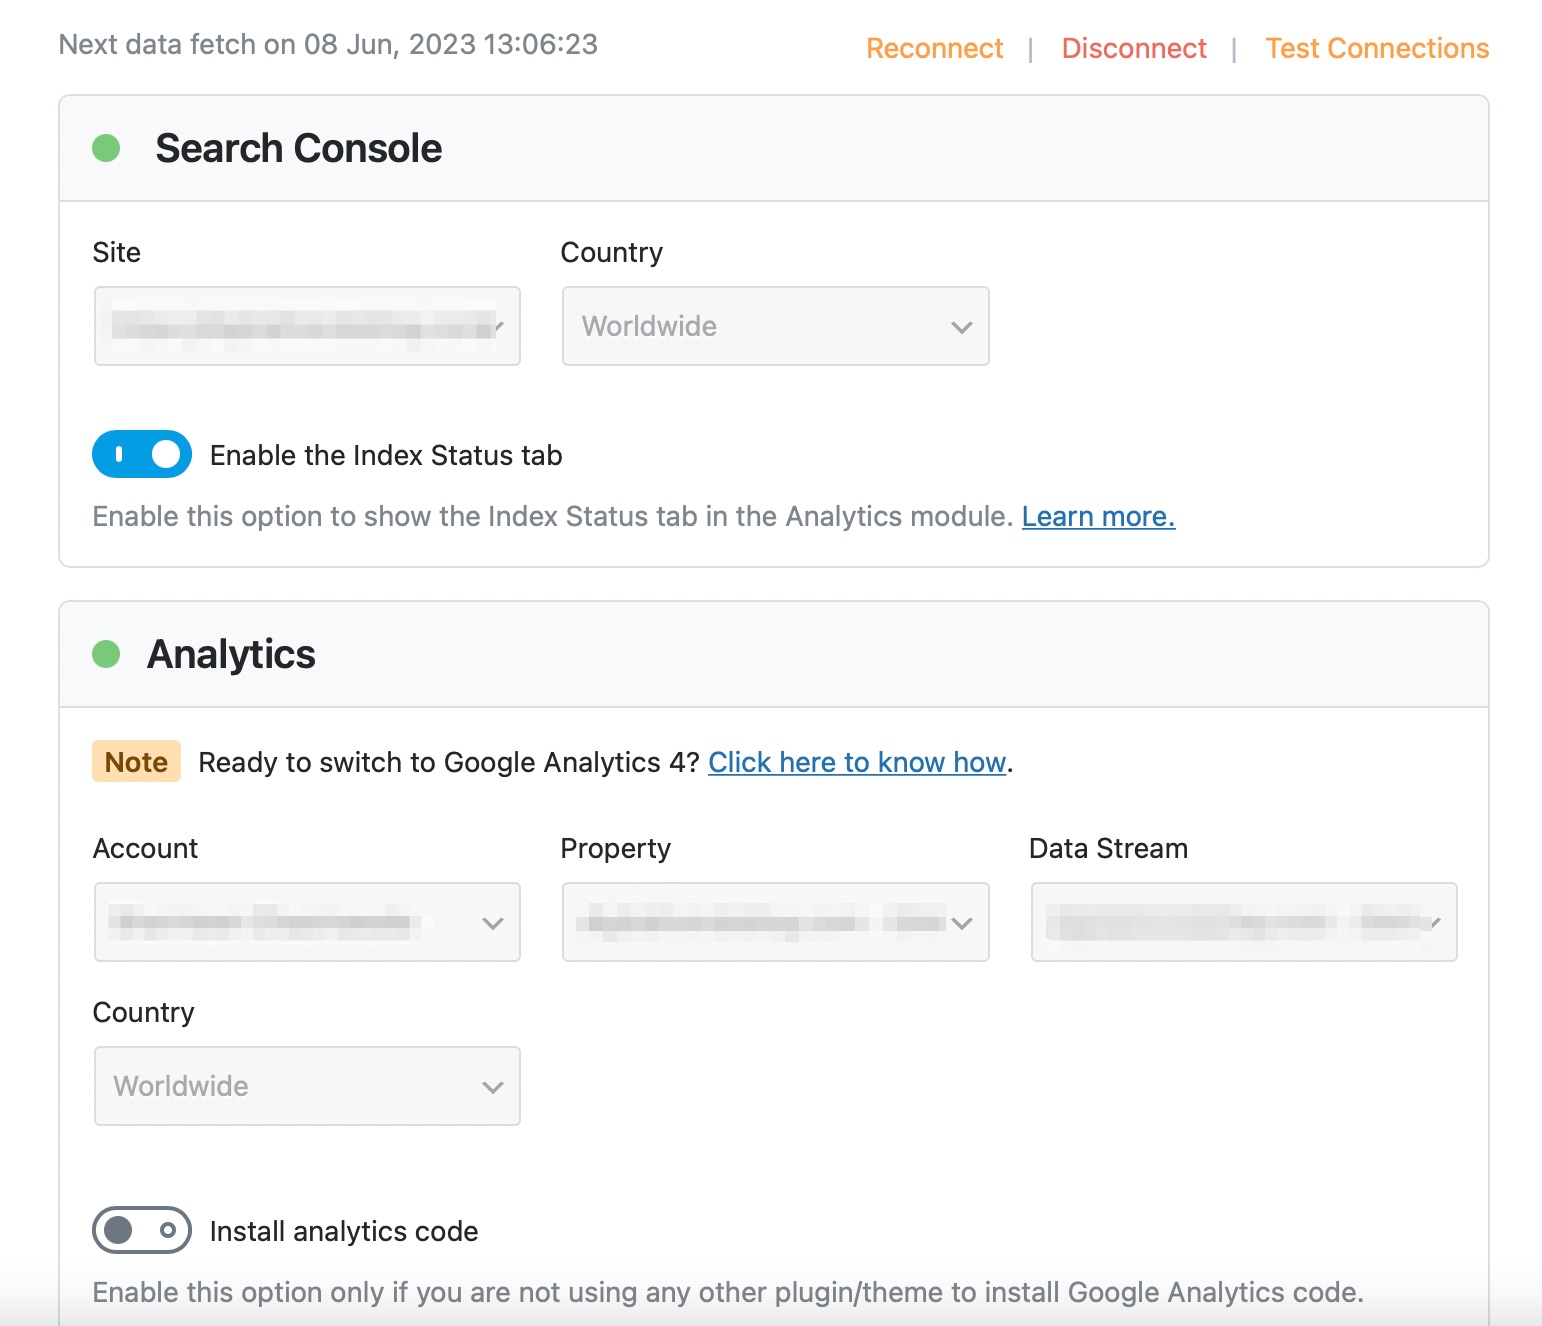 Search Console and Analytics configuration